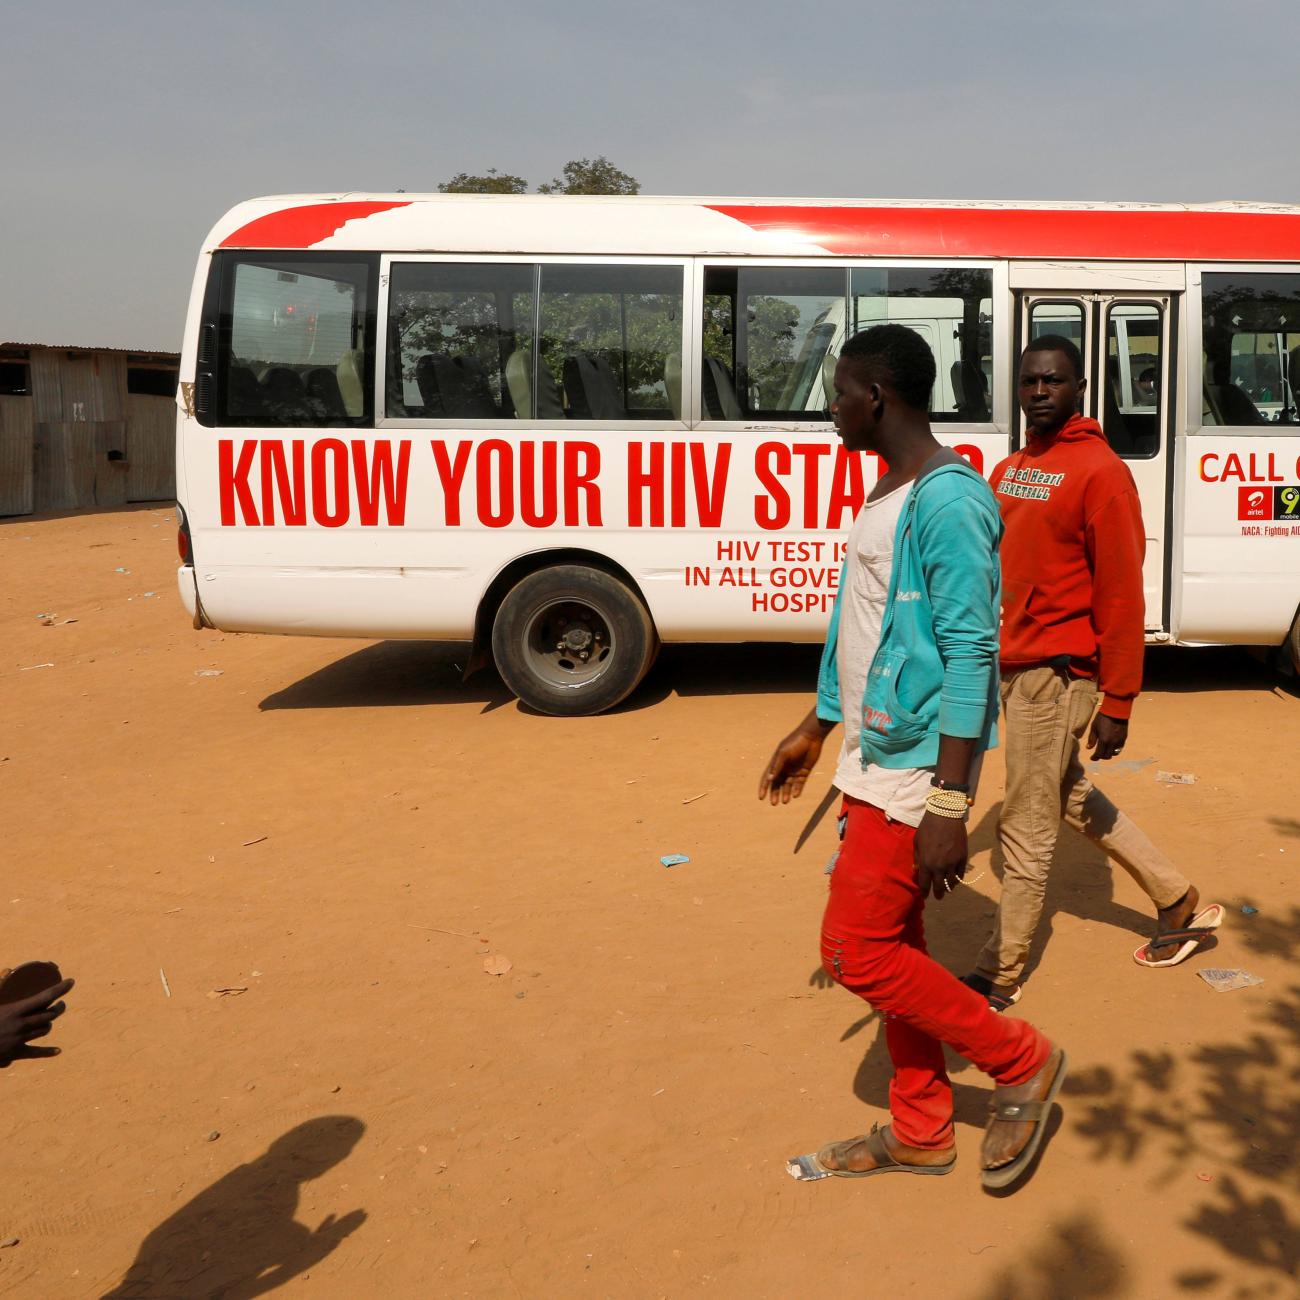 People walk past a bus during an HIV/AIDS awareness campaign on the occasion of World AIDS Day in Abuja, Nigeria, December 1, 2018.